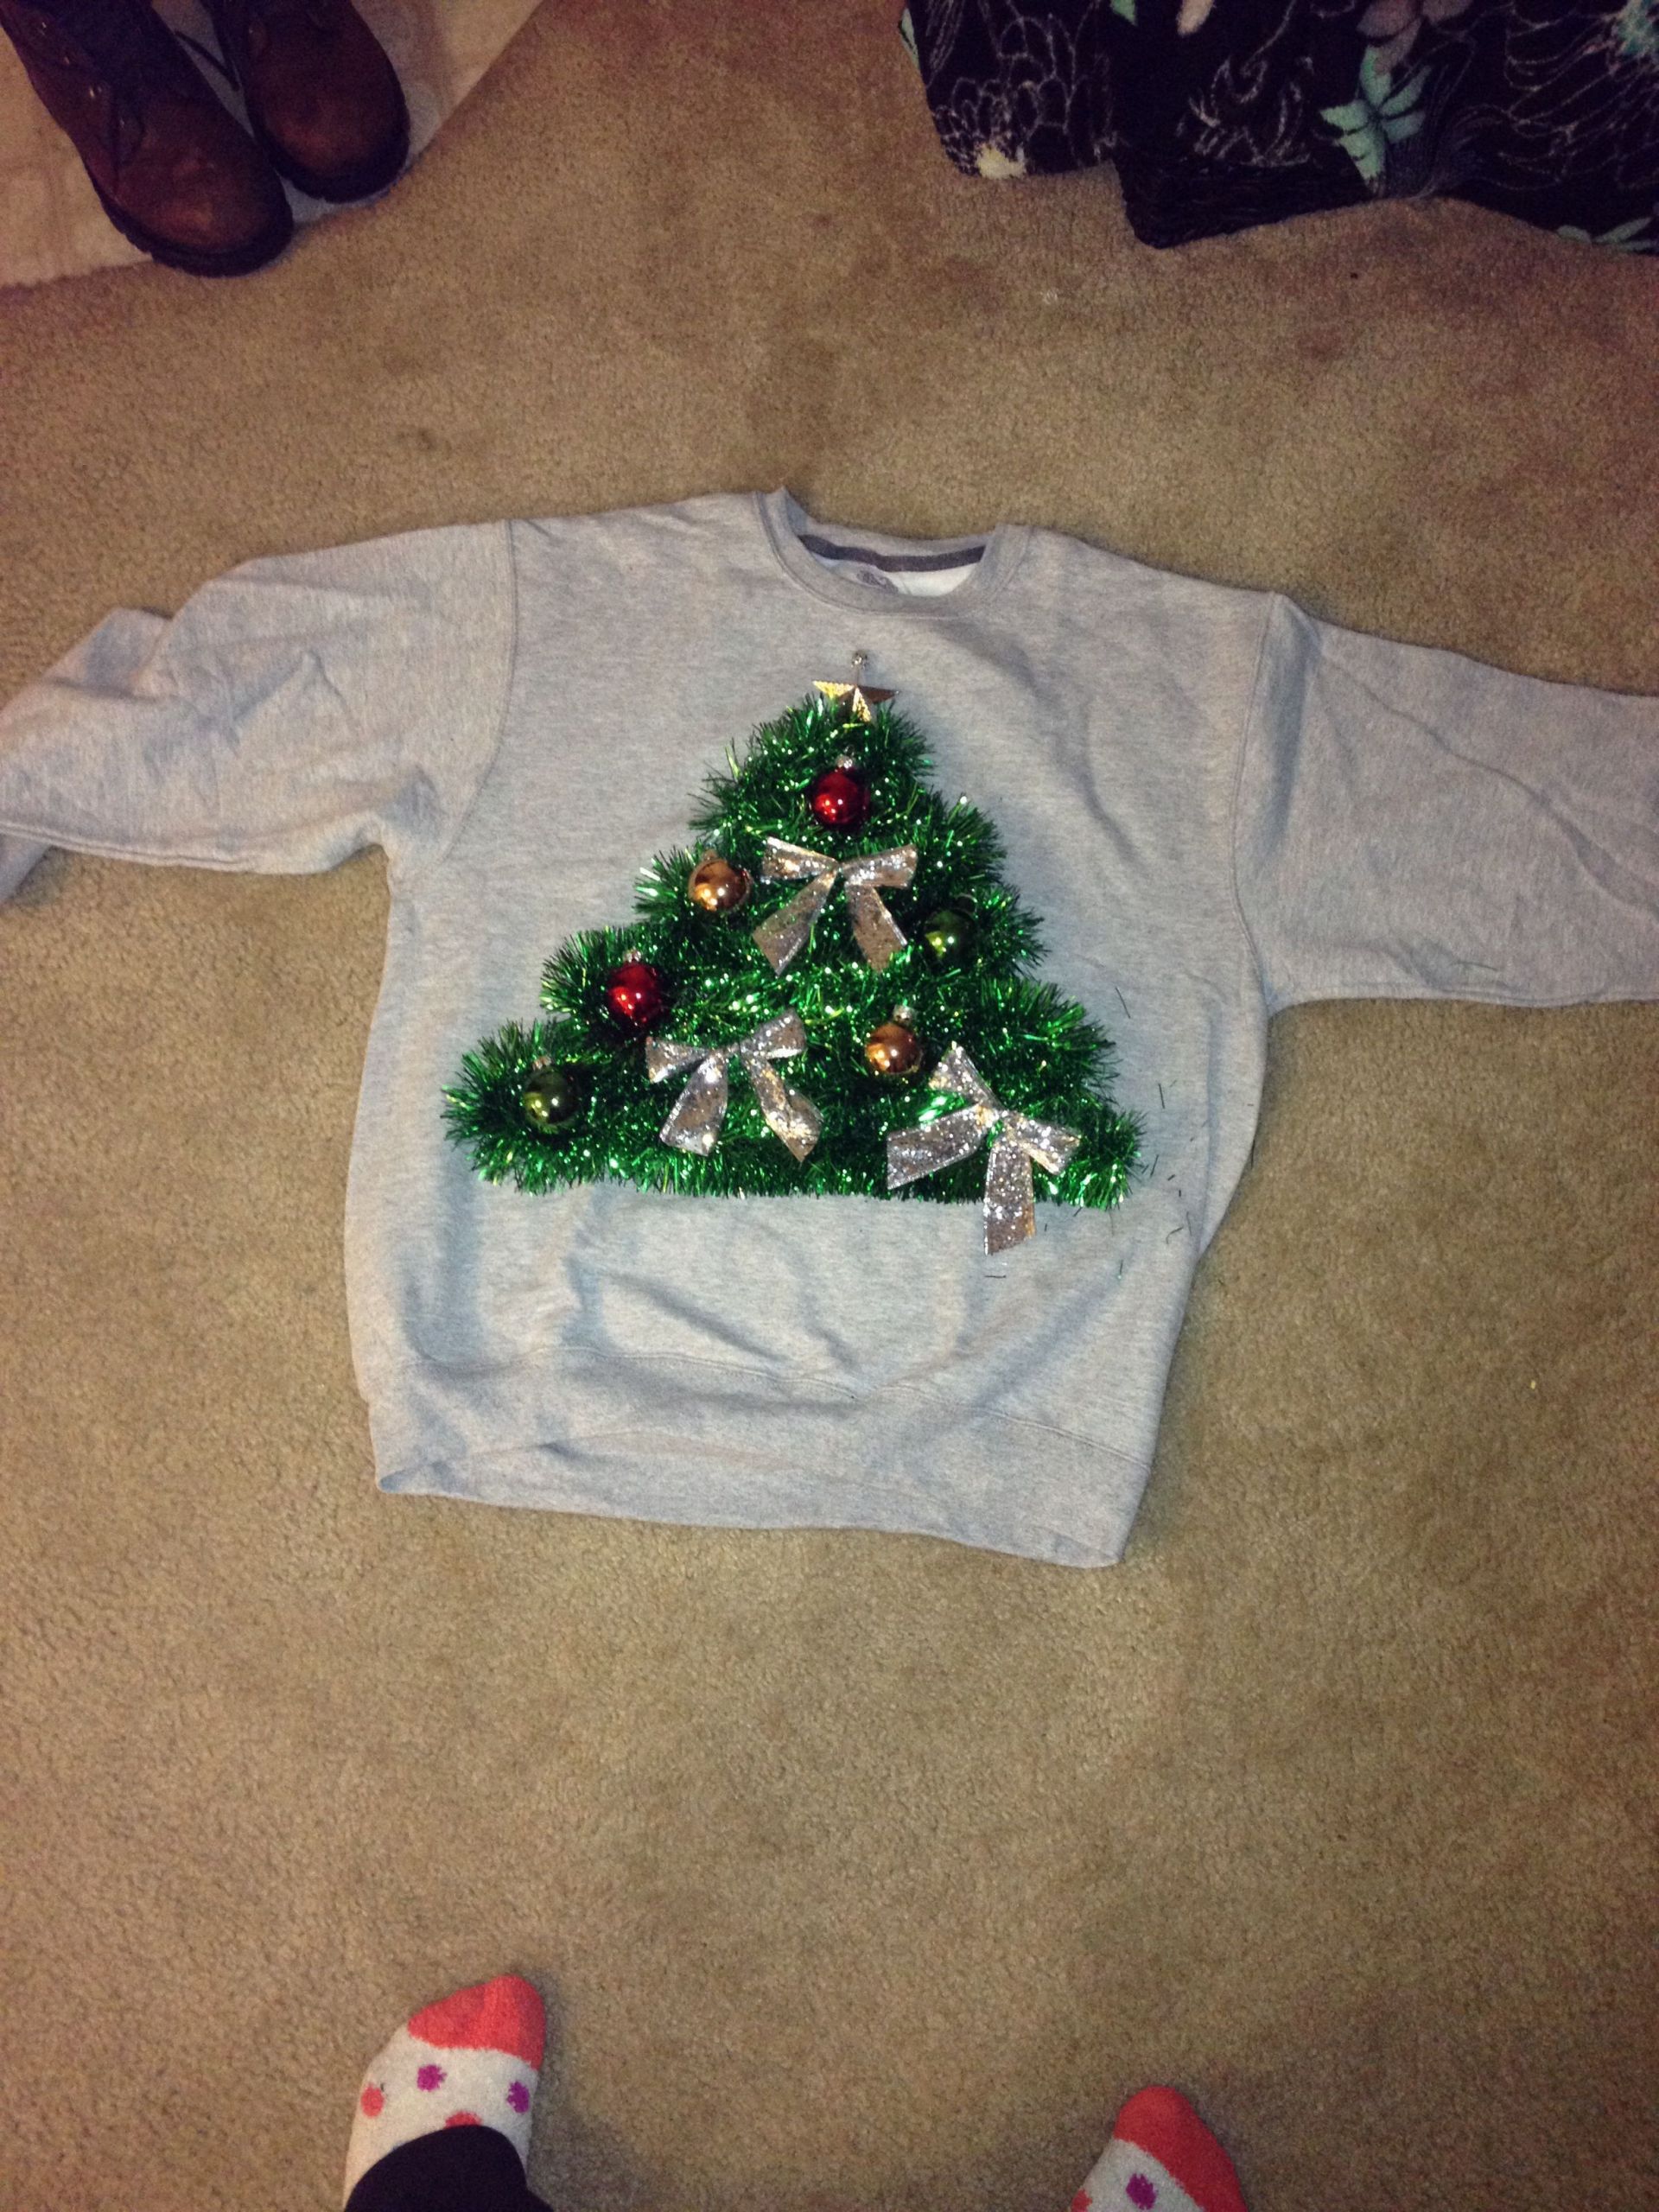 DIY Ugly Christmas Sweaters Pinterest
 DIY ugly Christmas sweater Holiday Ideas